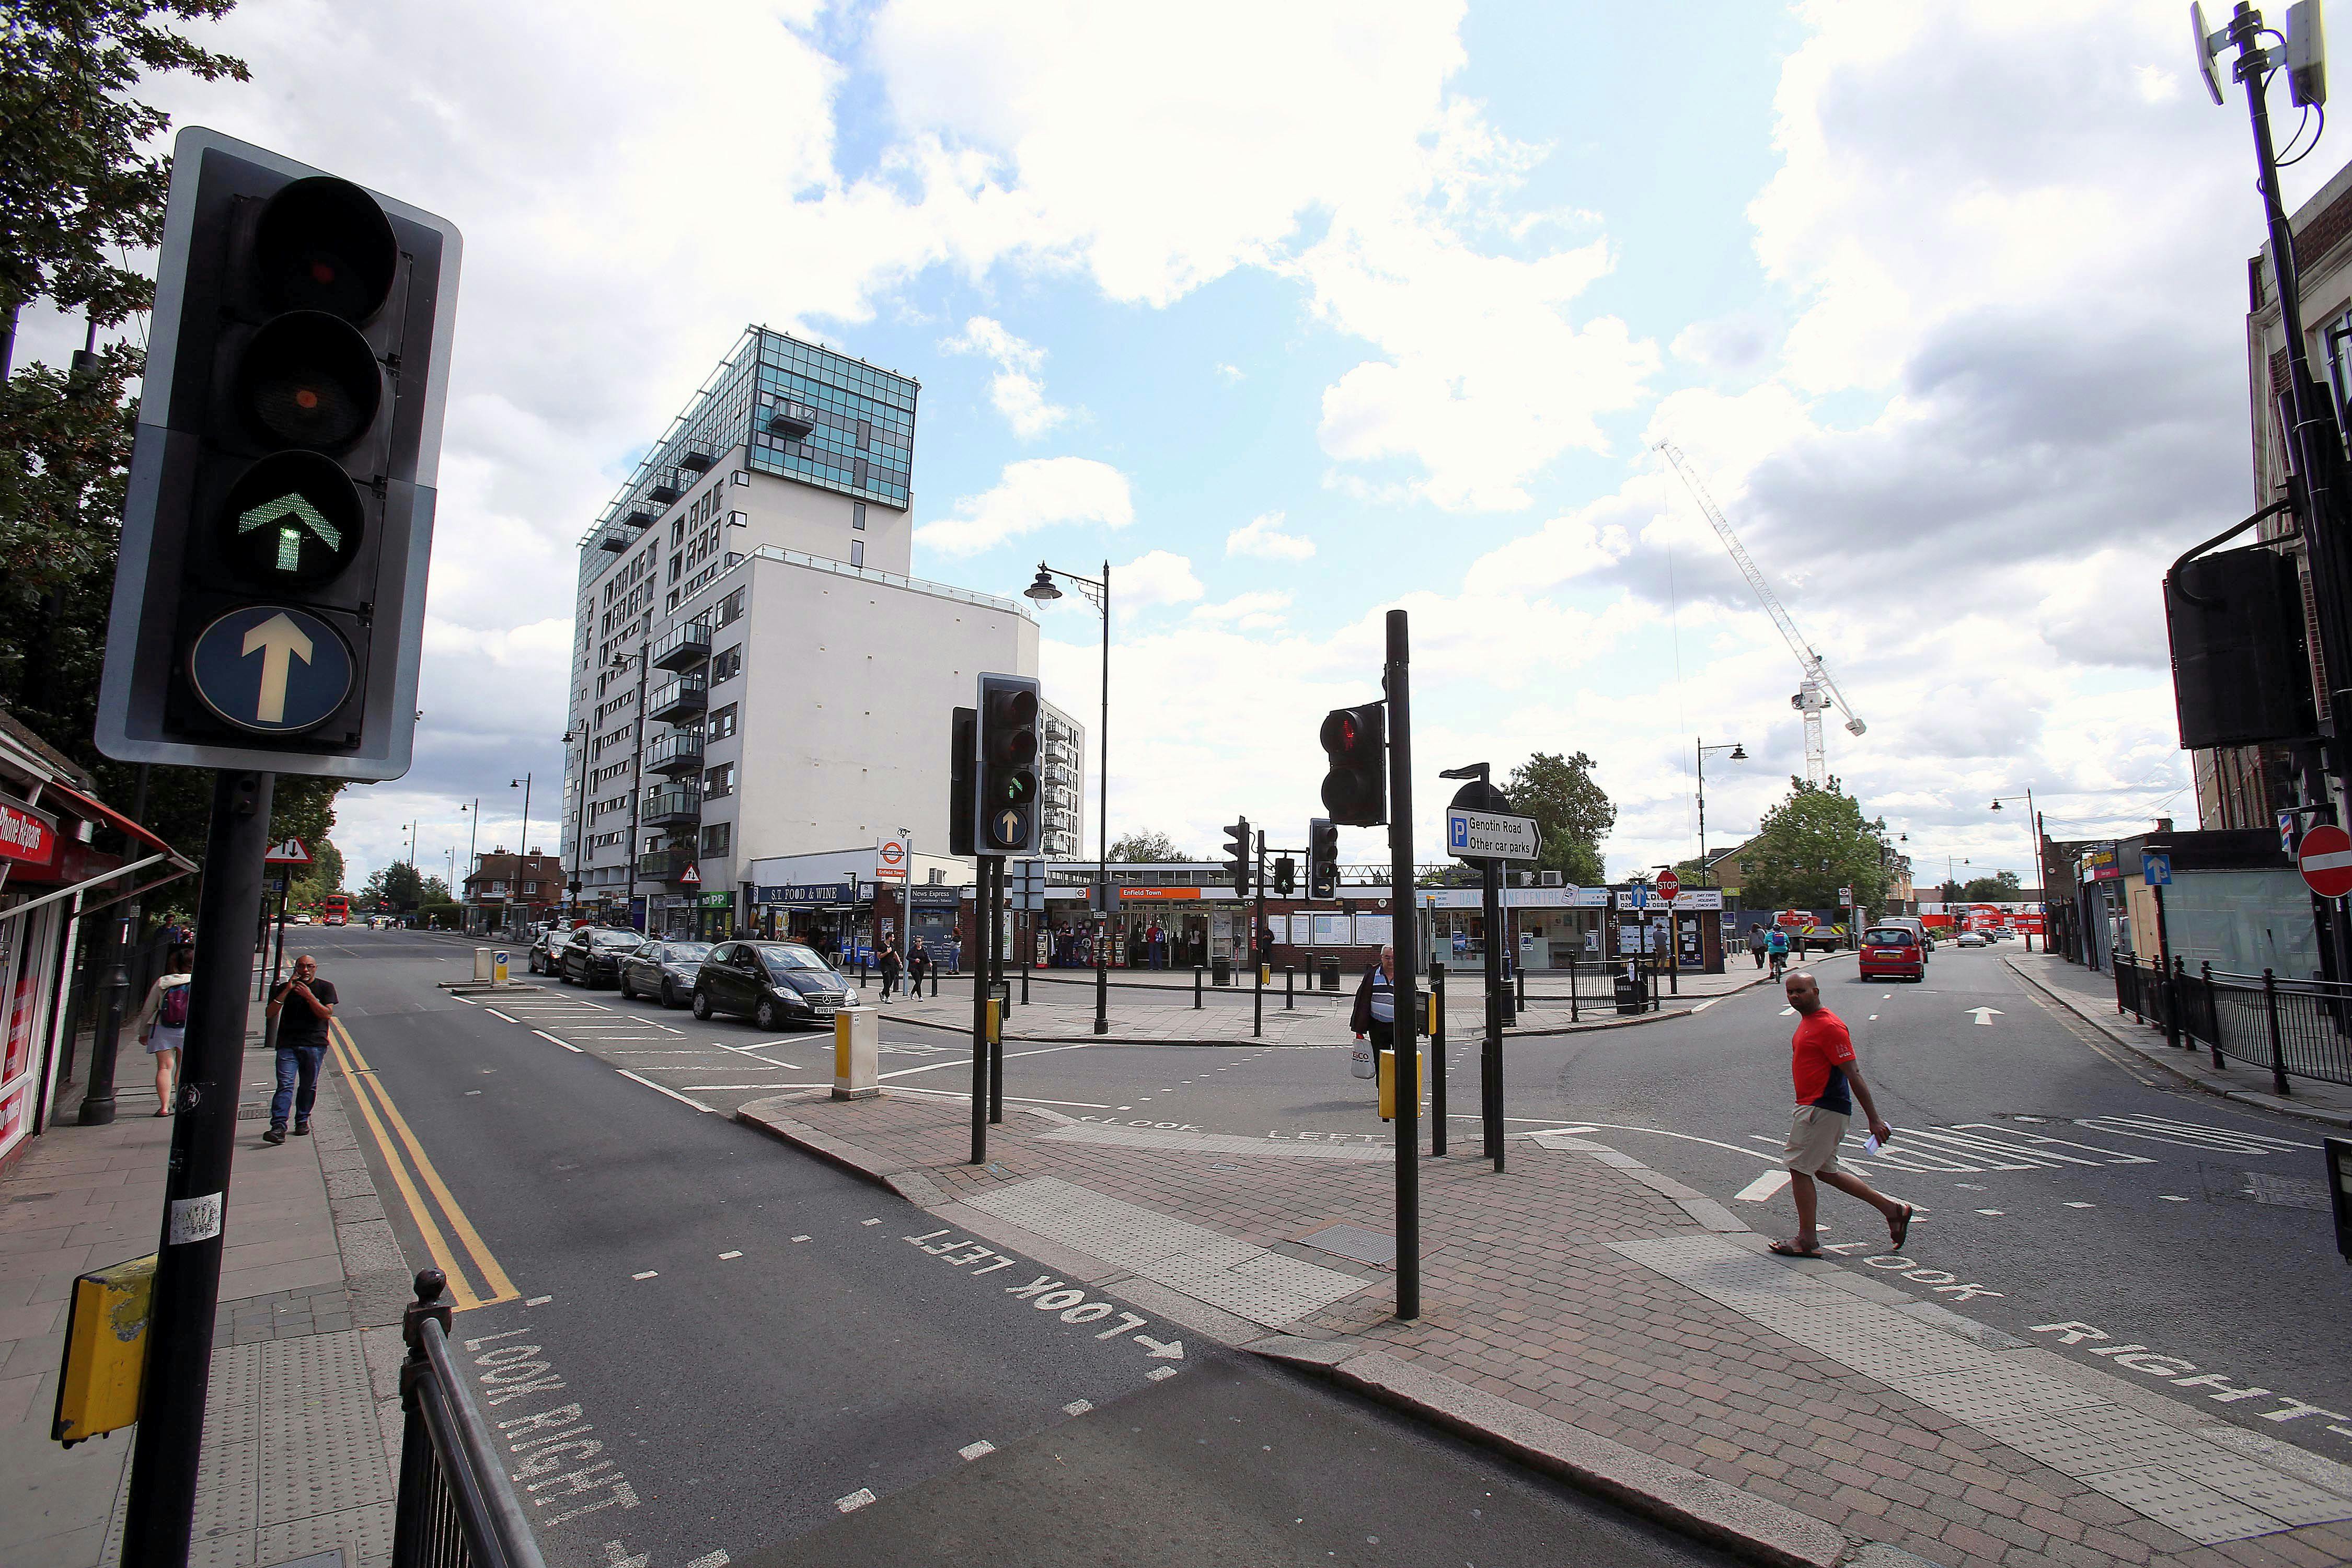 A view of Enfield Town Station Plaza, looking down Southbury Road